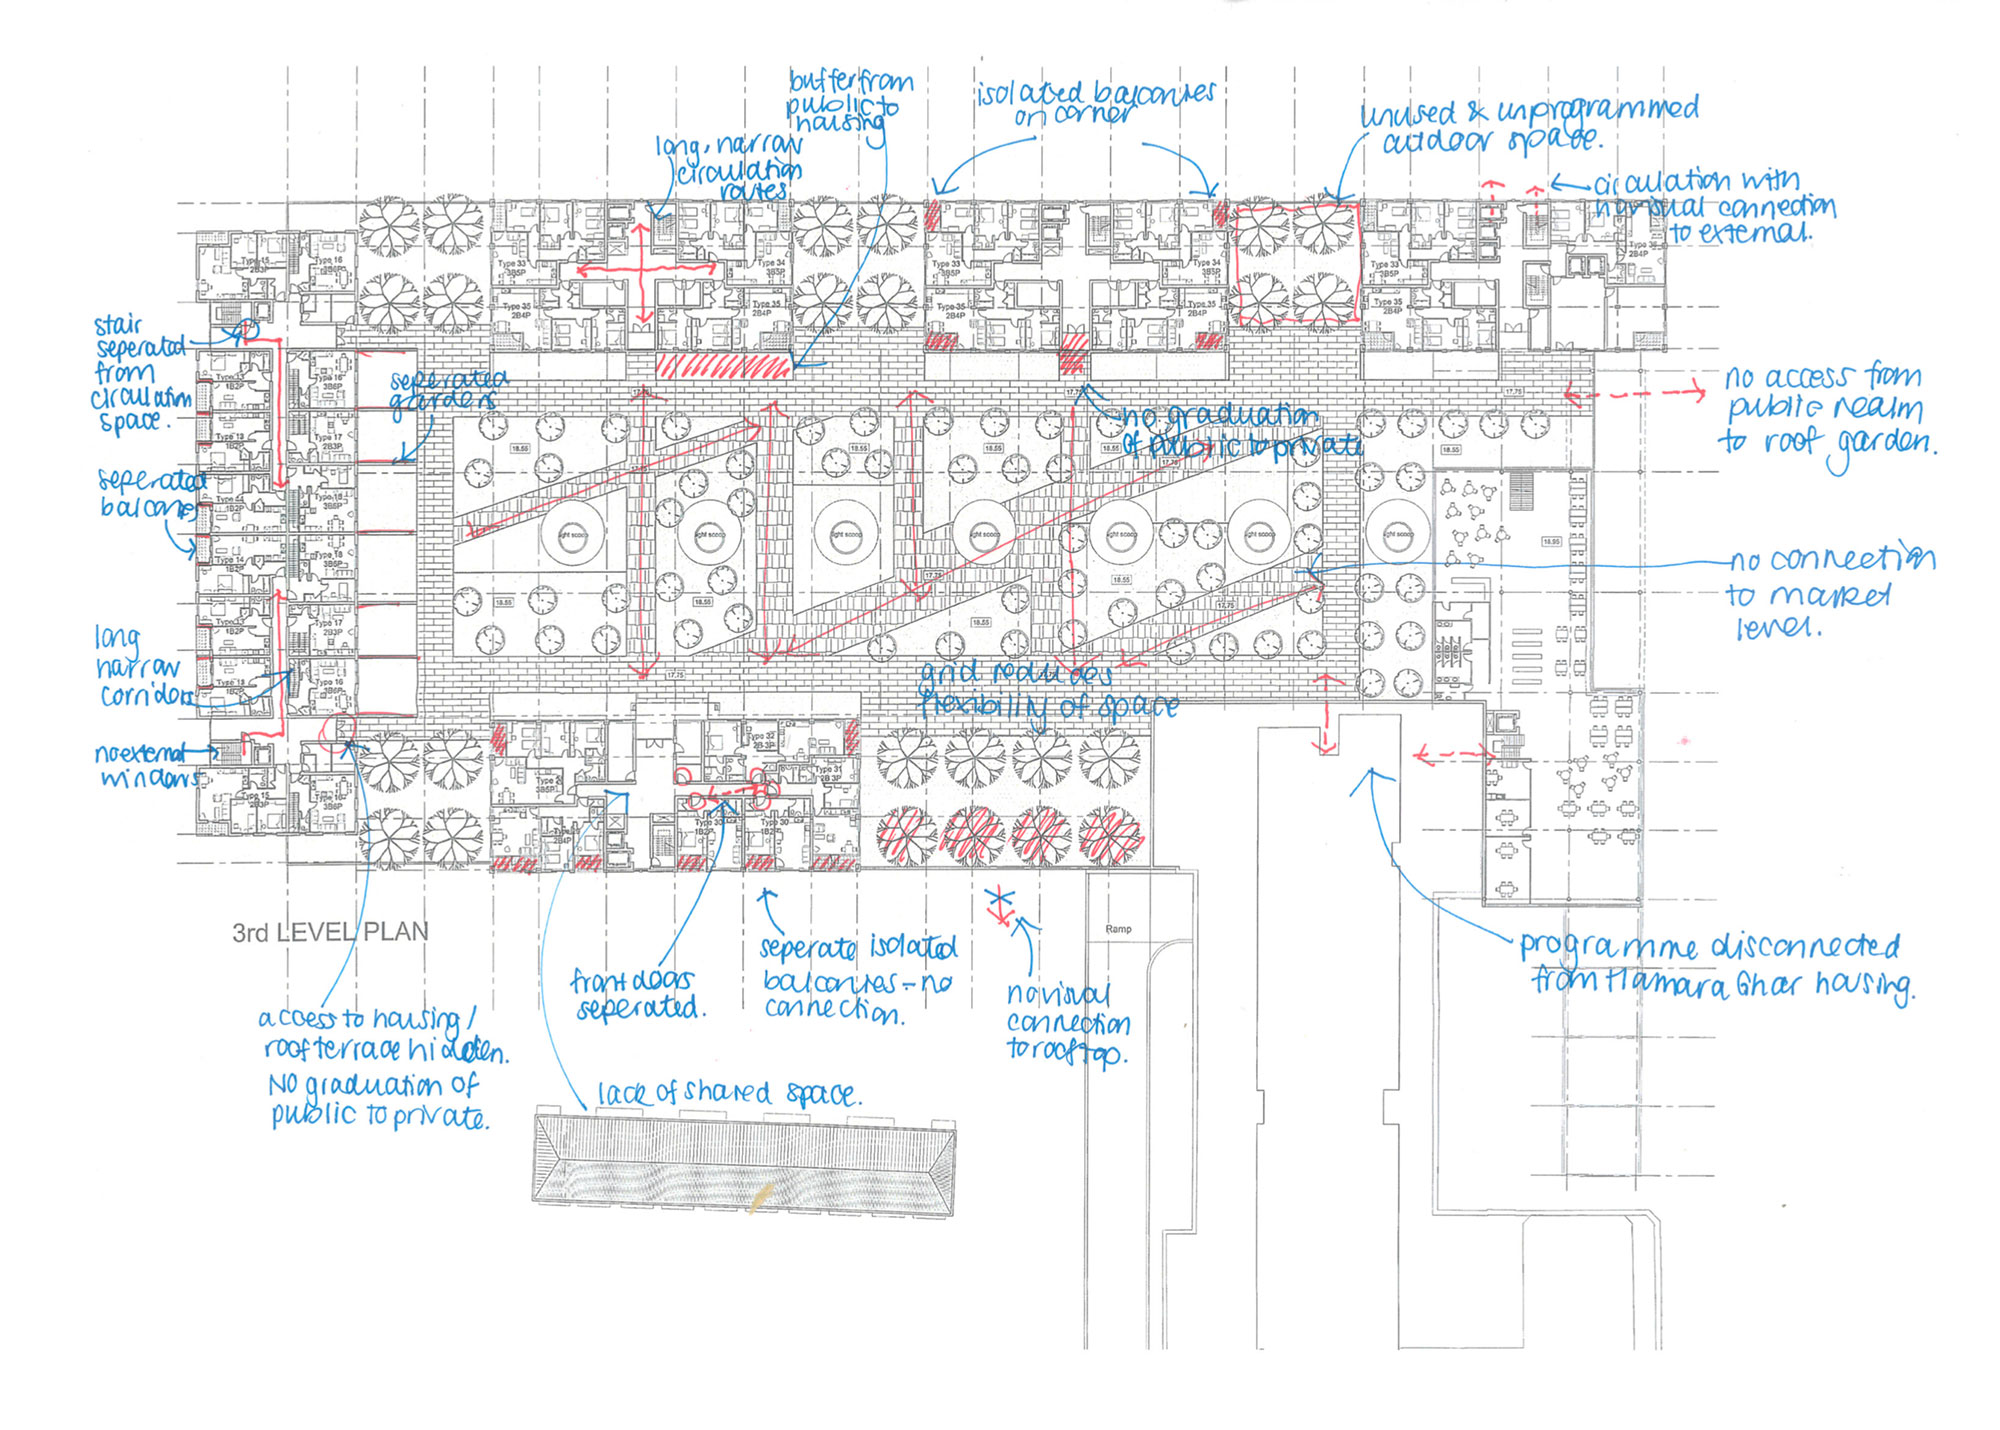 Analysis of the third floor plan of PRP’s proposed development with suggested enhancements.